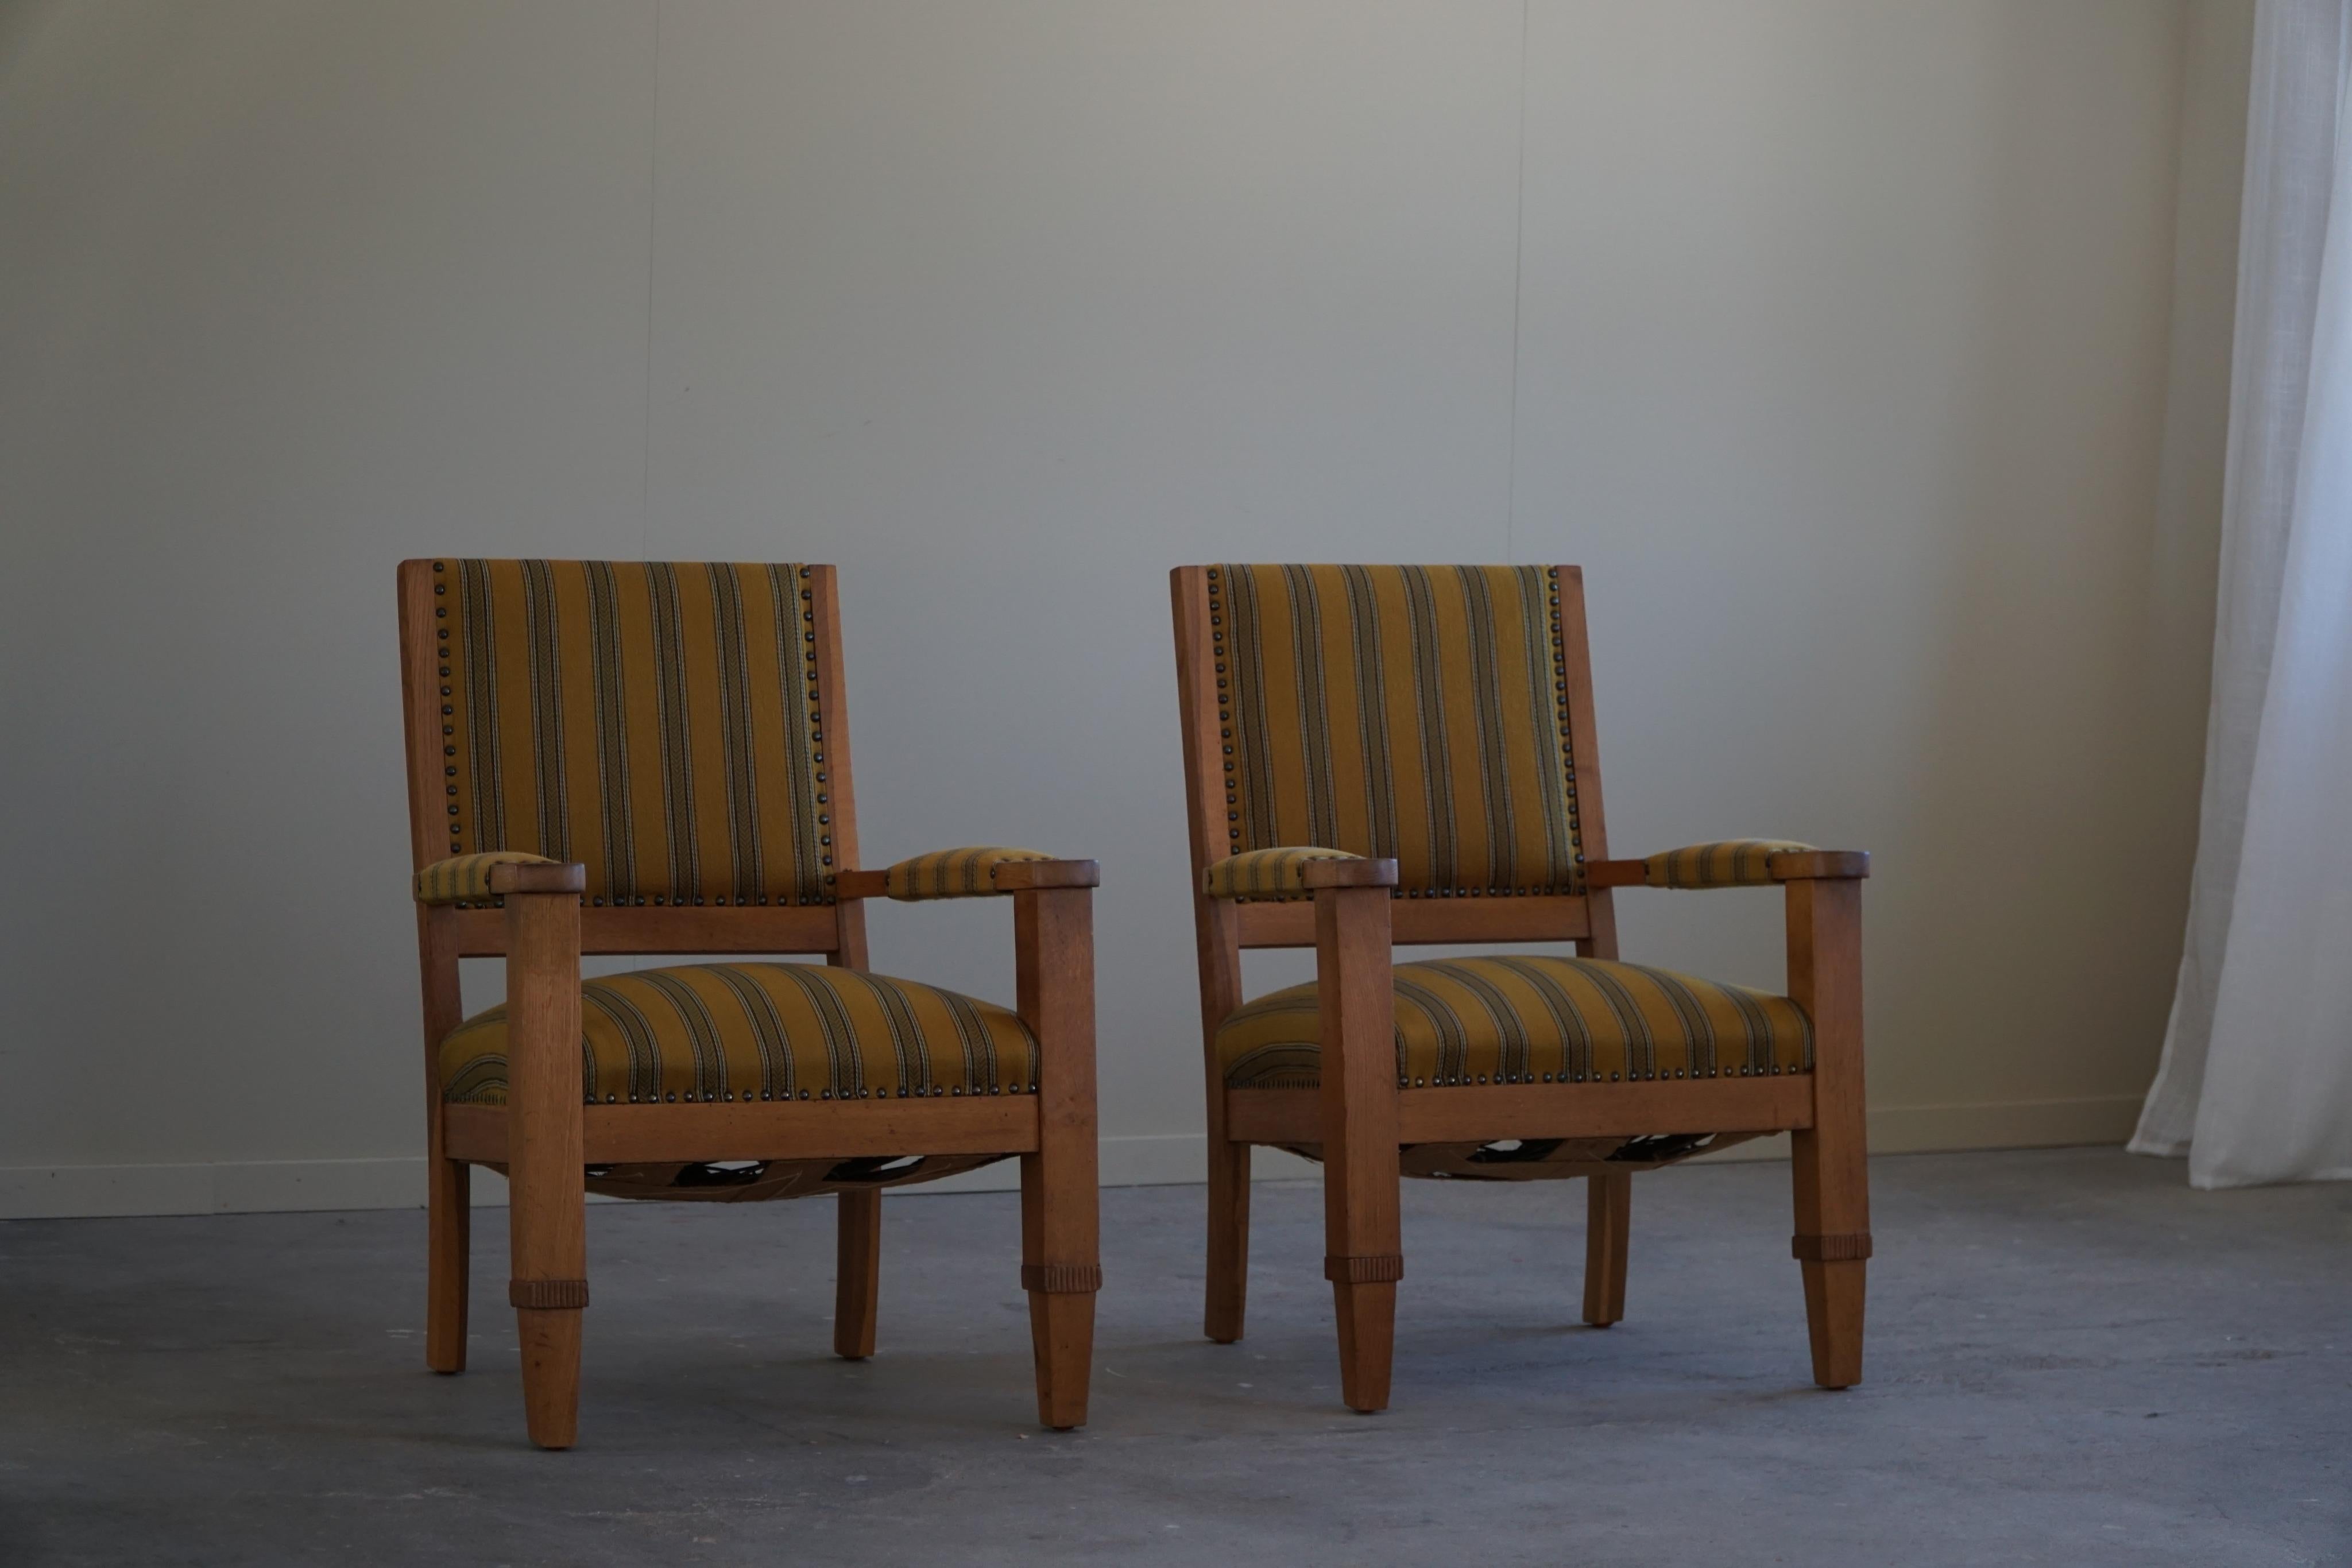 Pair of Art Deco Armchairs in Oak & Fabric, Danish Cabinetmaker, 1940s For Sale 3